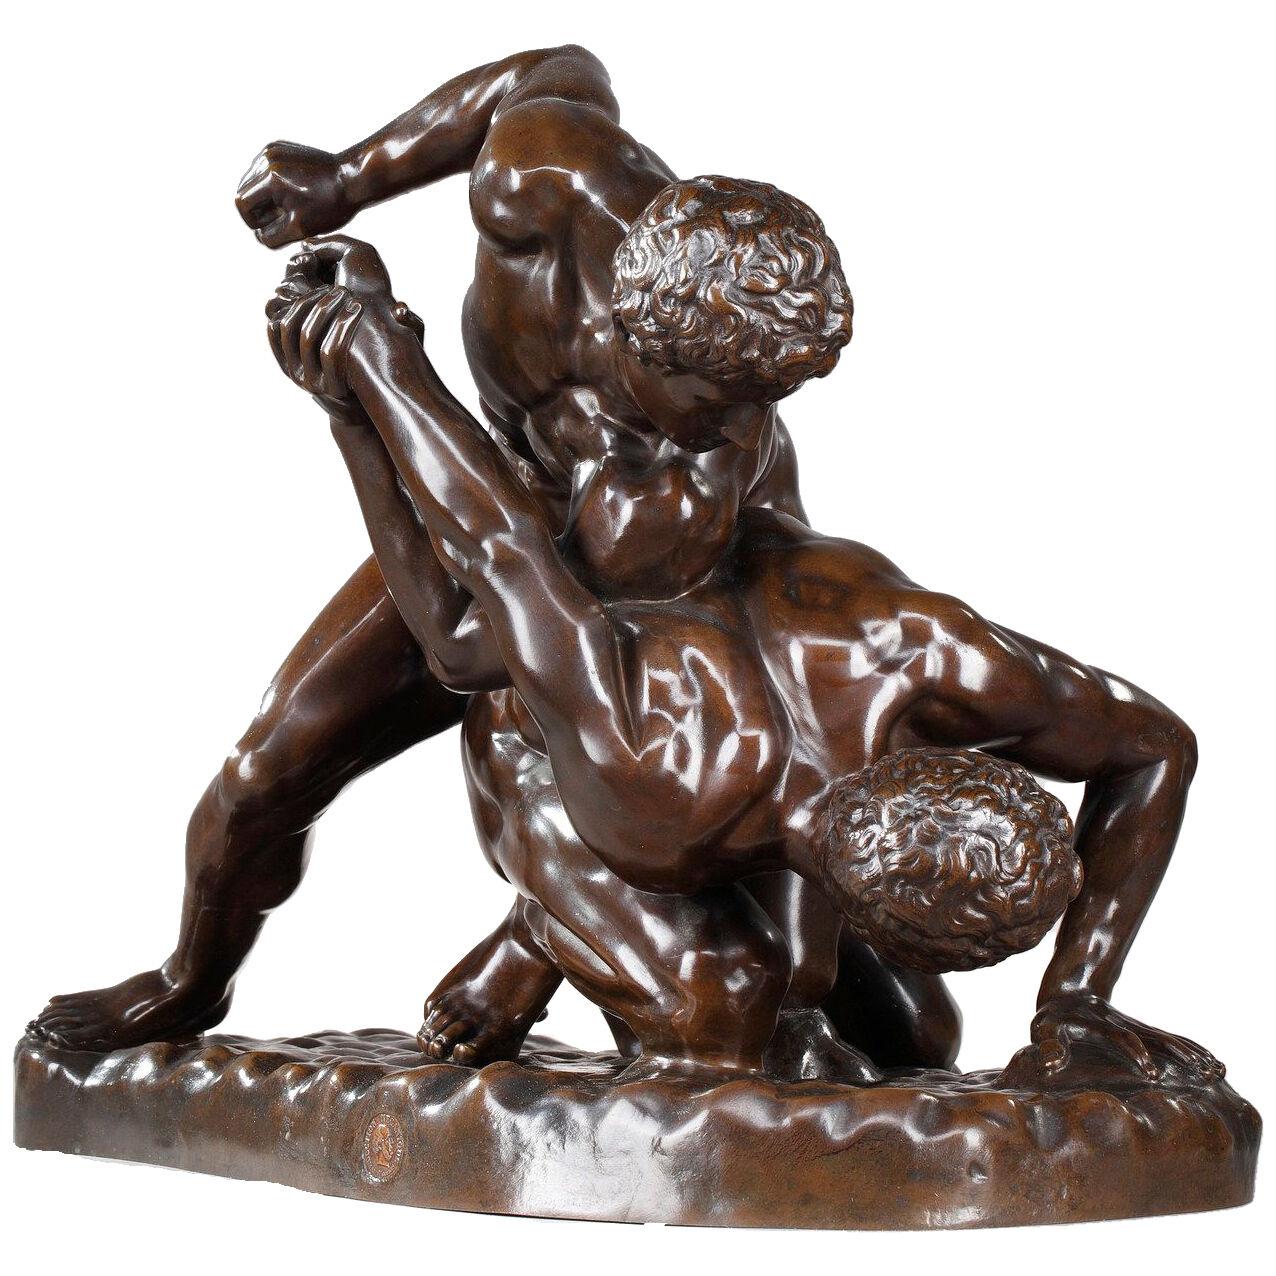 Bronze sculpture "The Wrestlers" after Philippe Magnier